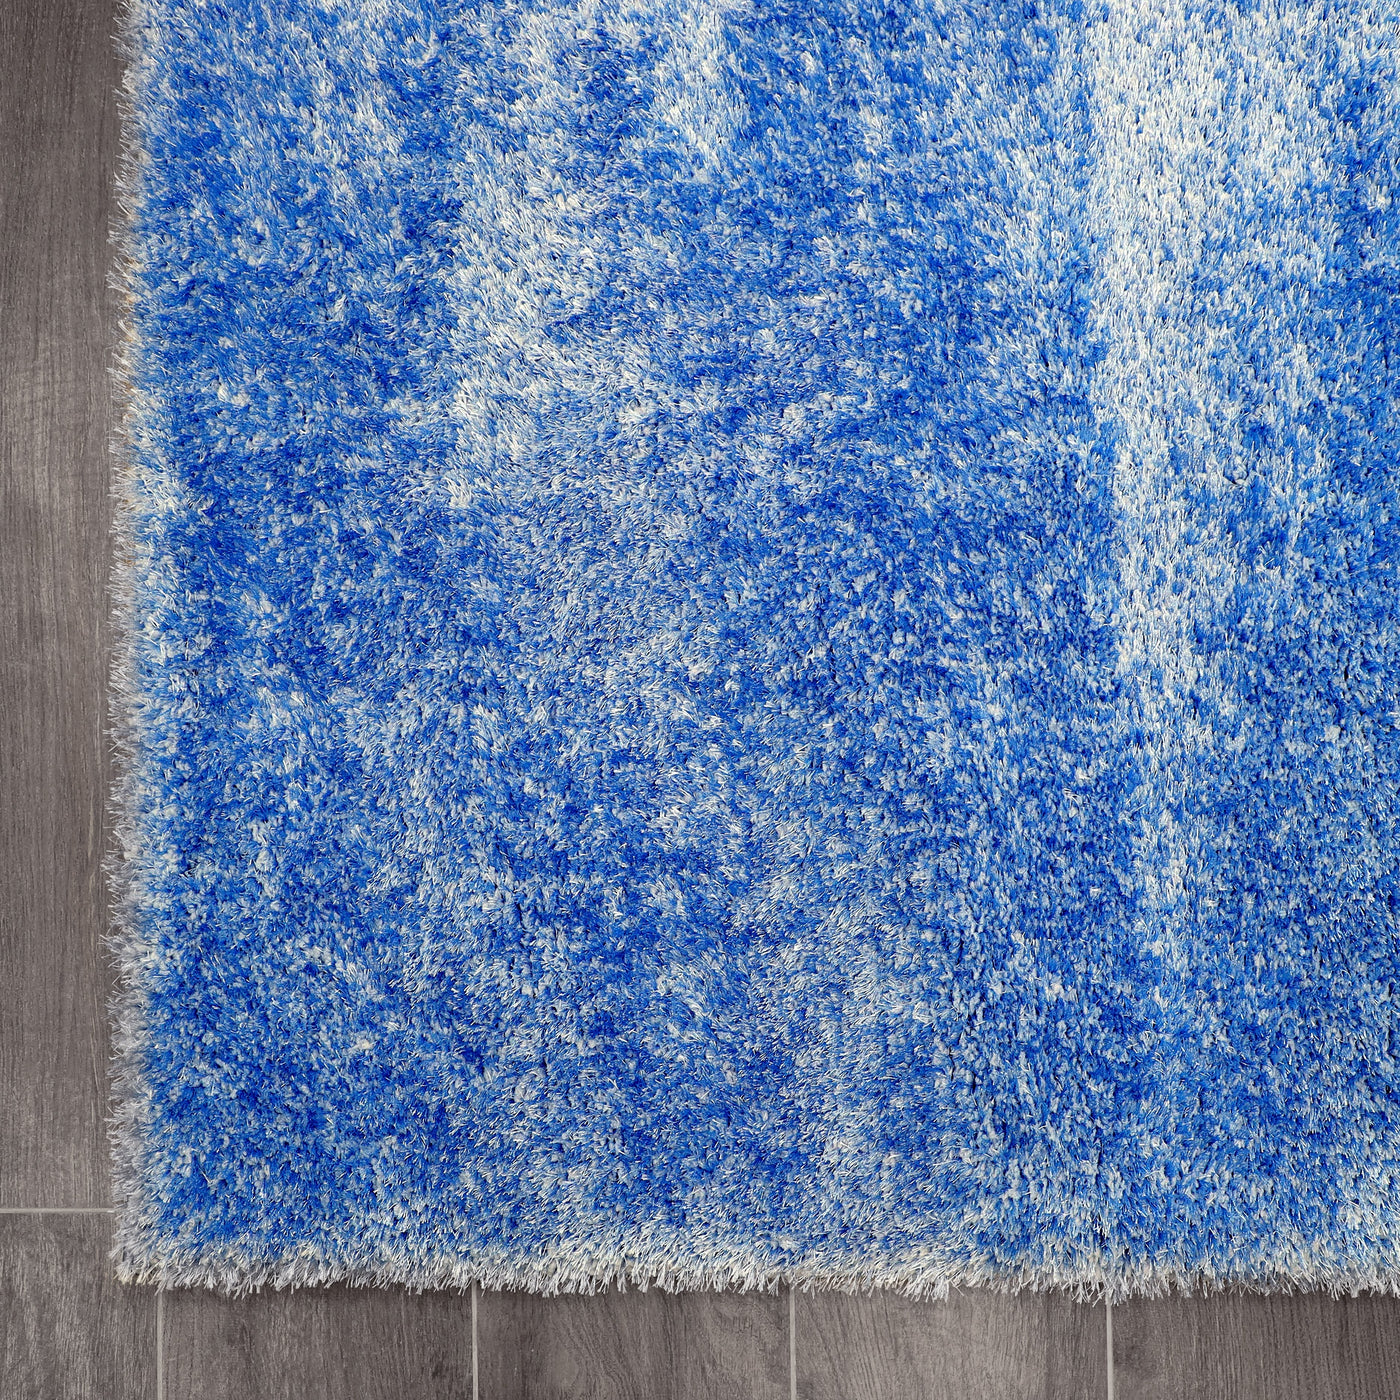 Puffy Super Soft Shaggy Blue Rug The Rugs Outlet 